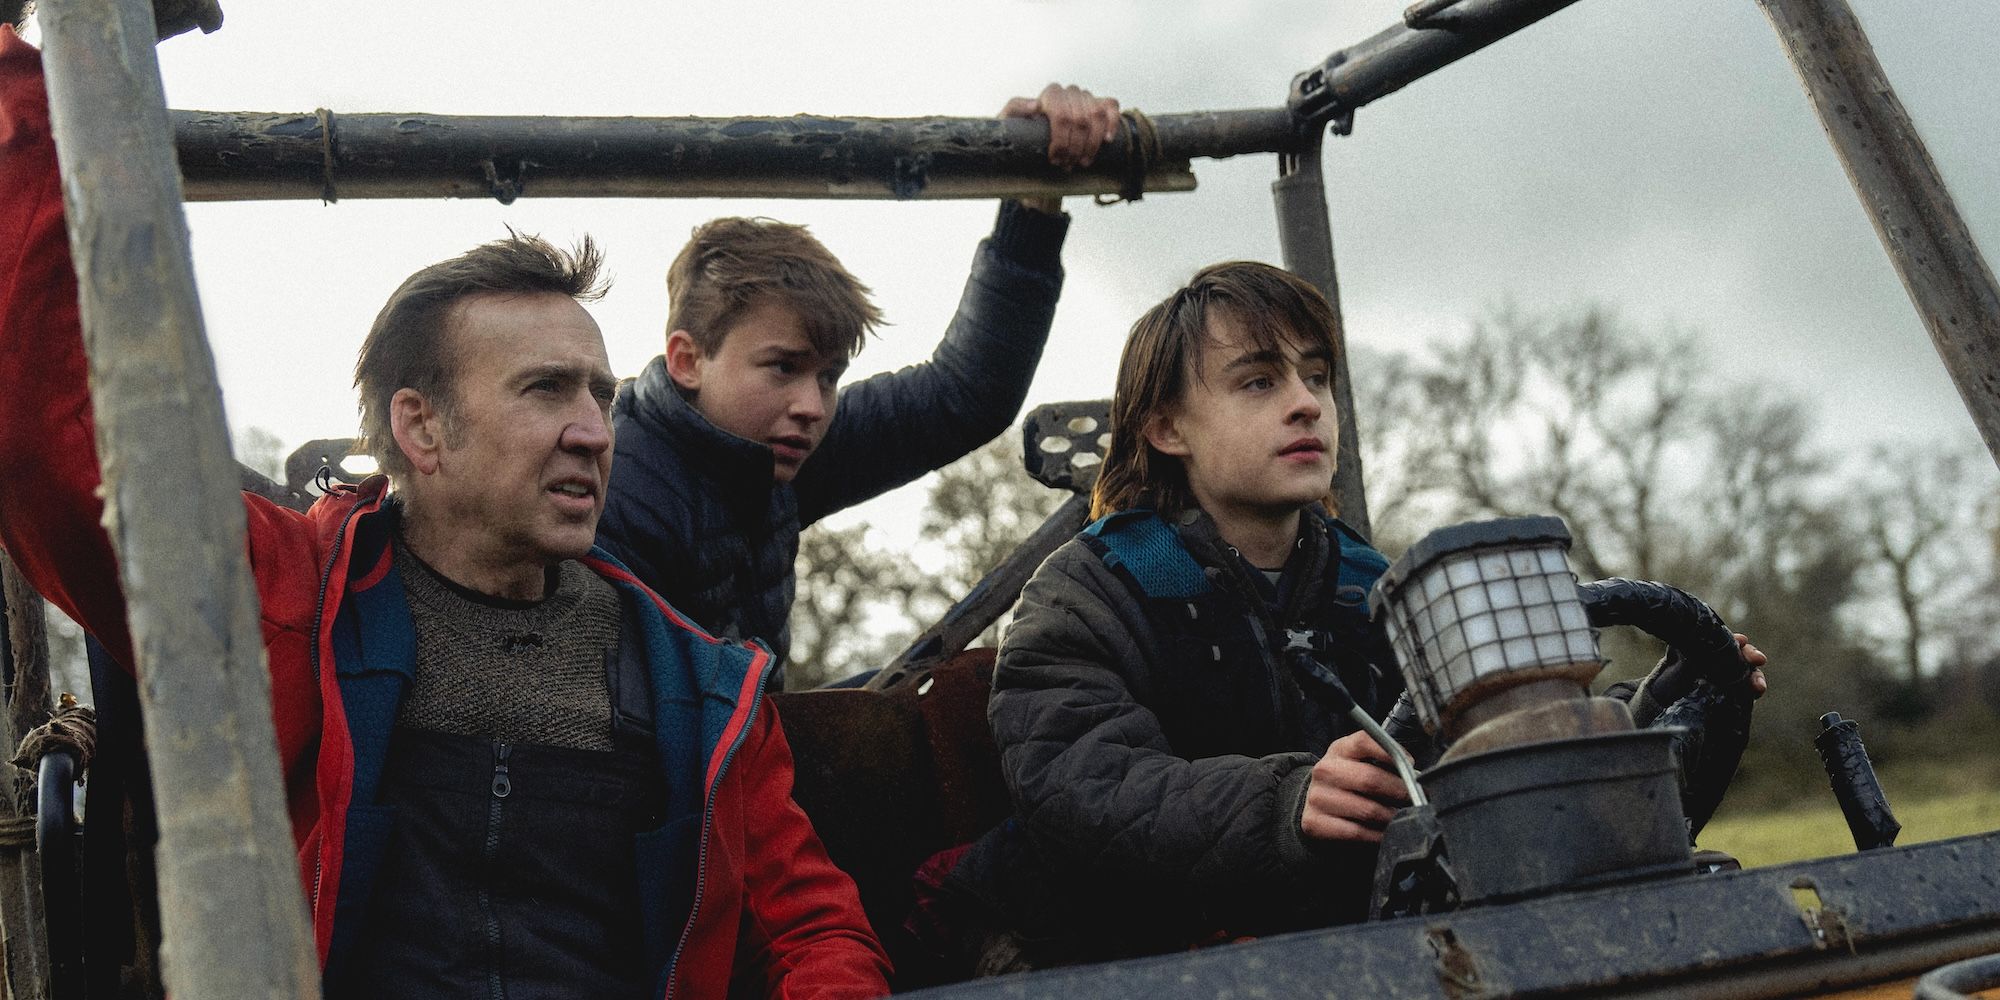 Nicolas Cage's Paul rides in a truck with his onscreen sons in Arcadian movie still